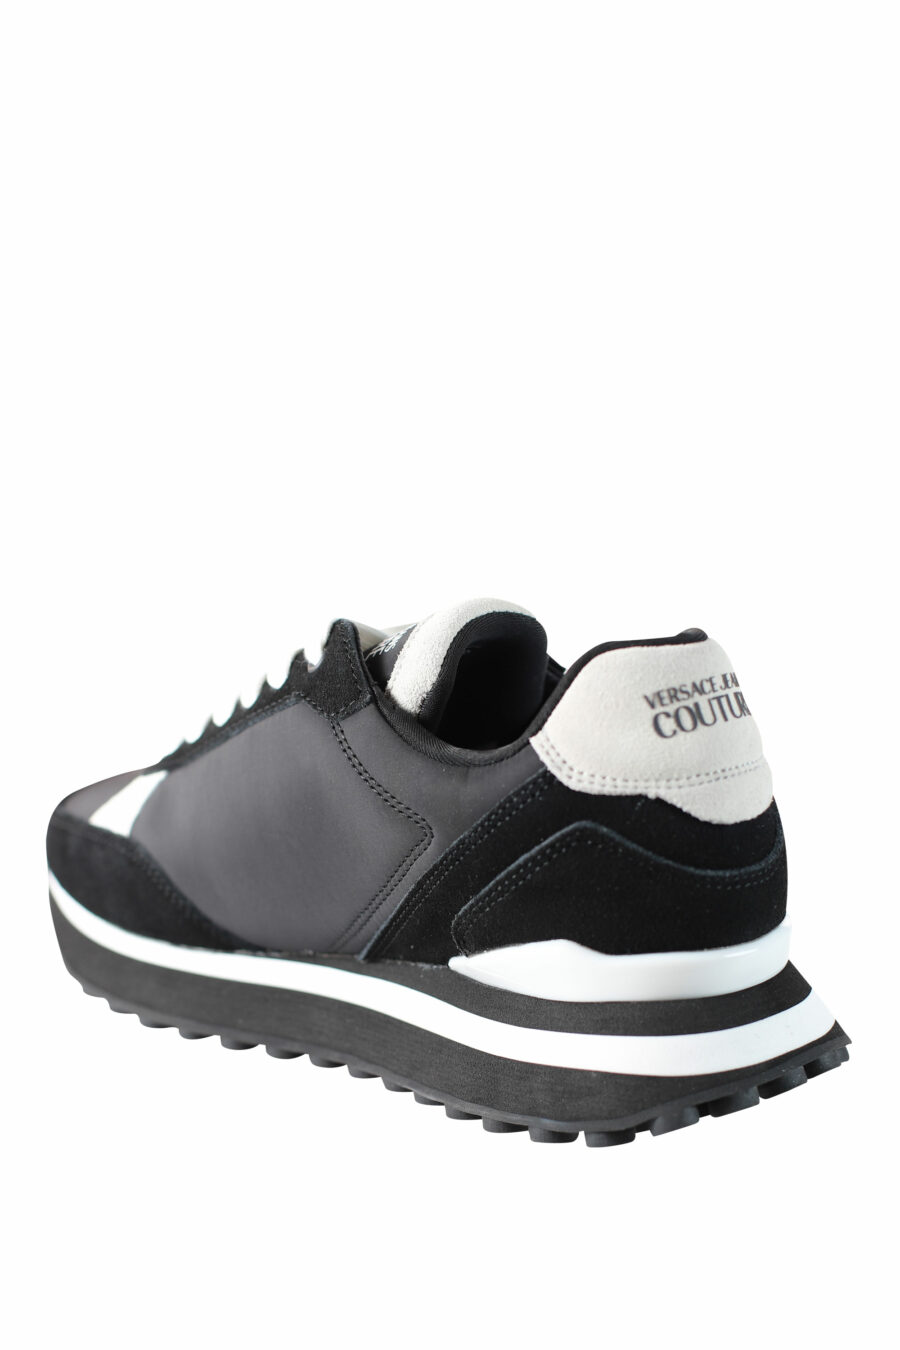 Trainers black with beige "spyke" with white logo - IMG 4536